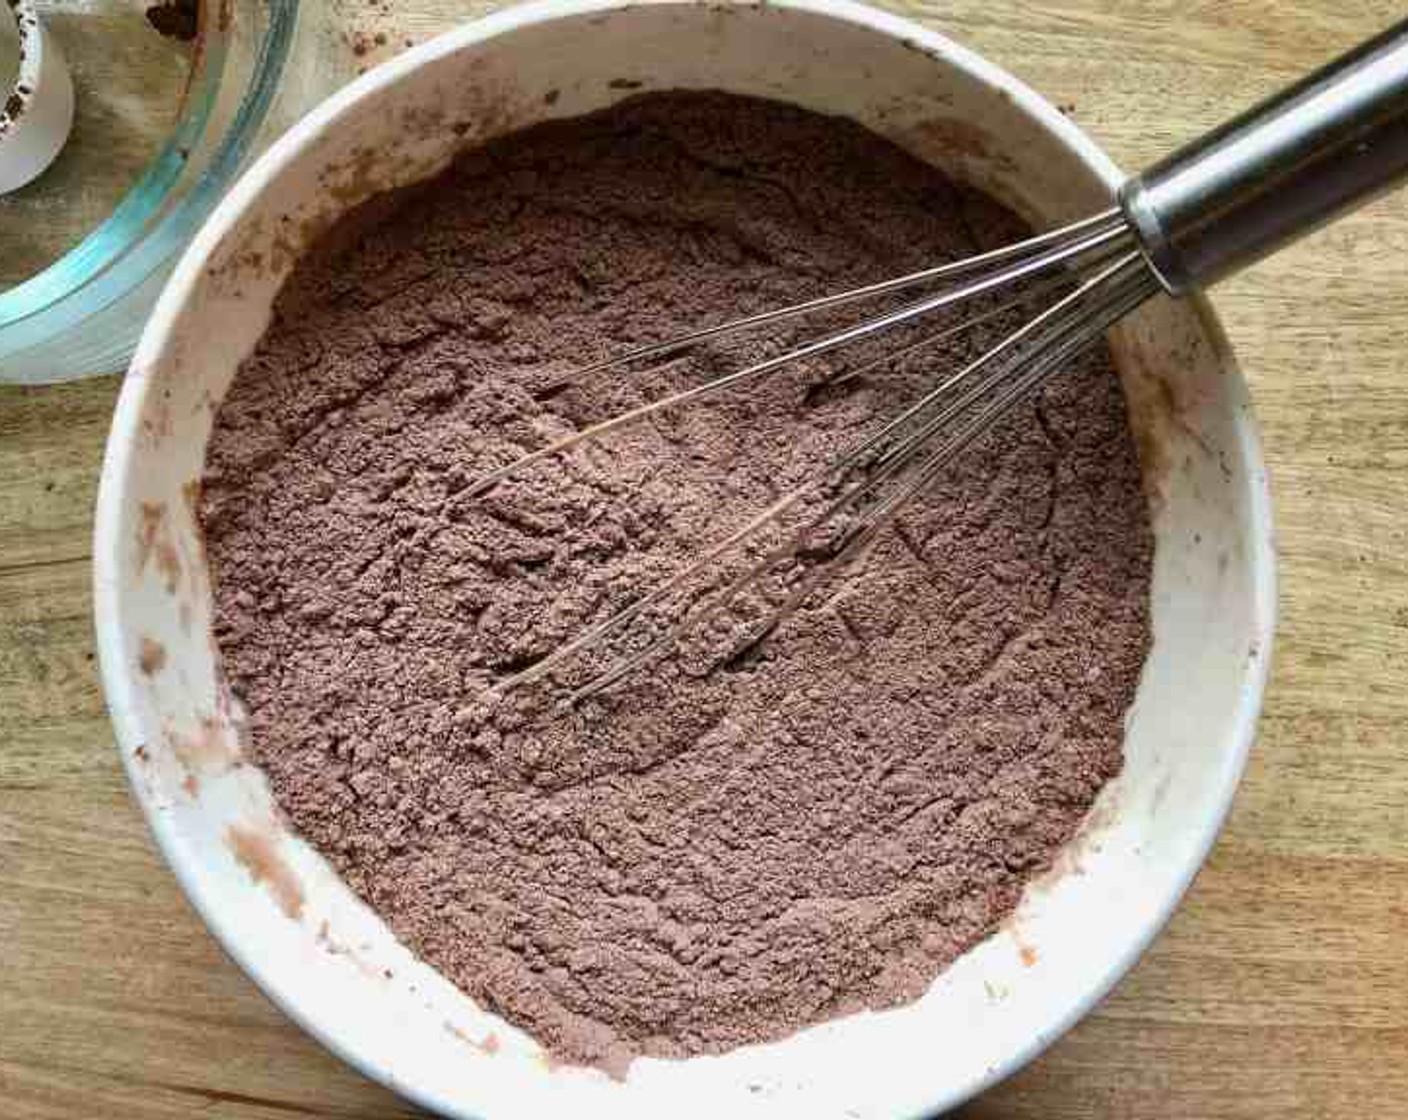 step 1 Whisk All-Purpose Flour (1 1/2 cups), Dutch Processed Cocoa Powder (3/4 cup), Baking Powder (3/4 tsp), and Salt (1 tsp) in a medium bowl to combine. Set aside.